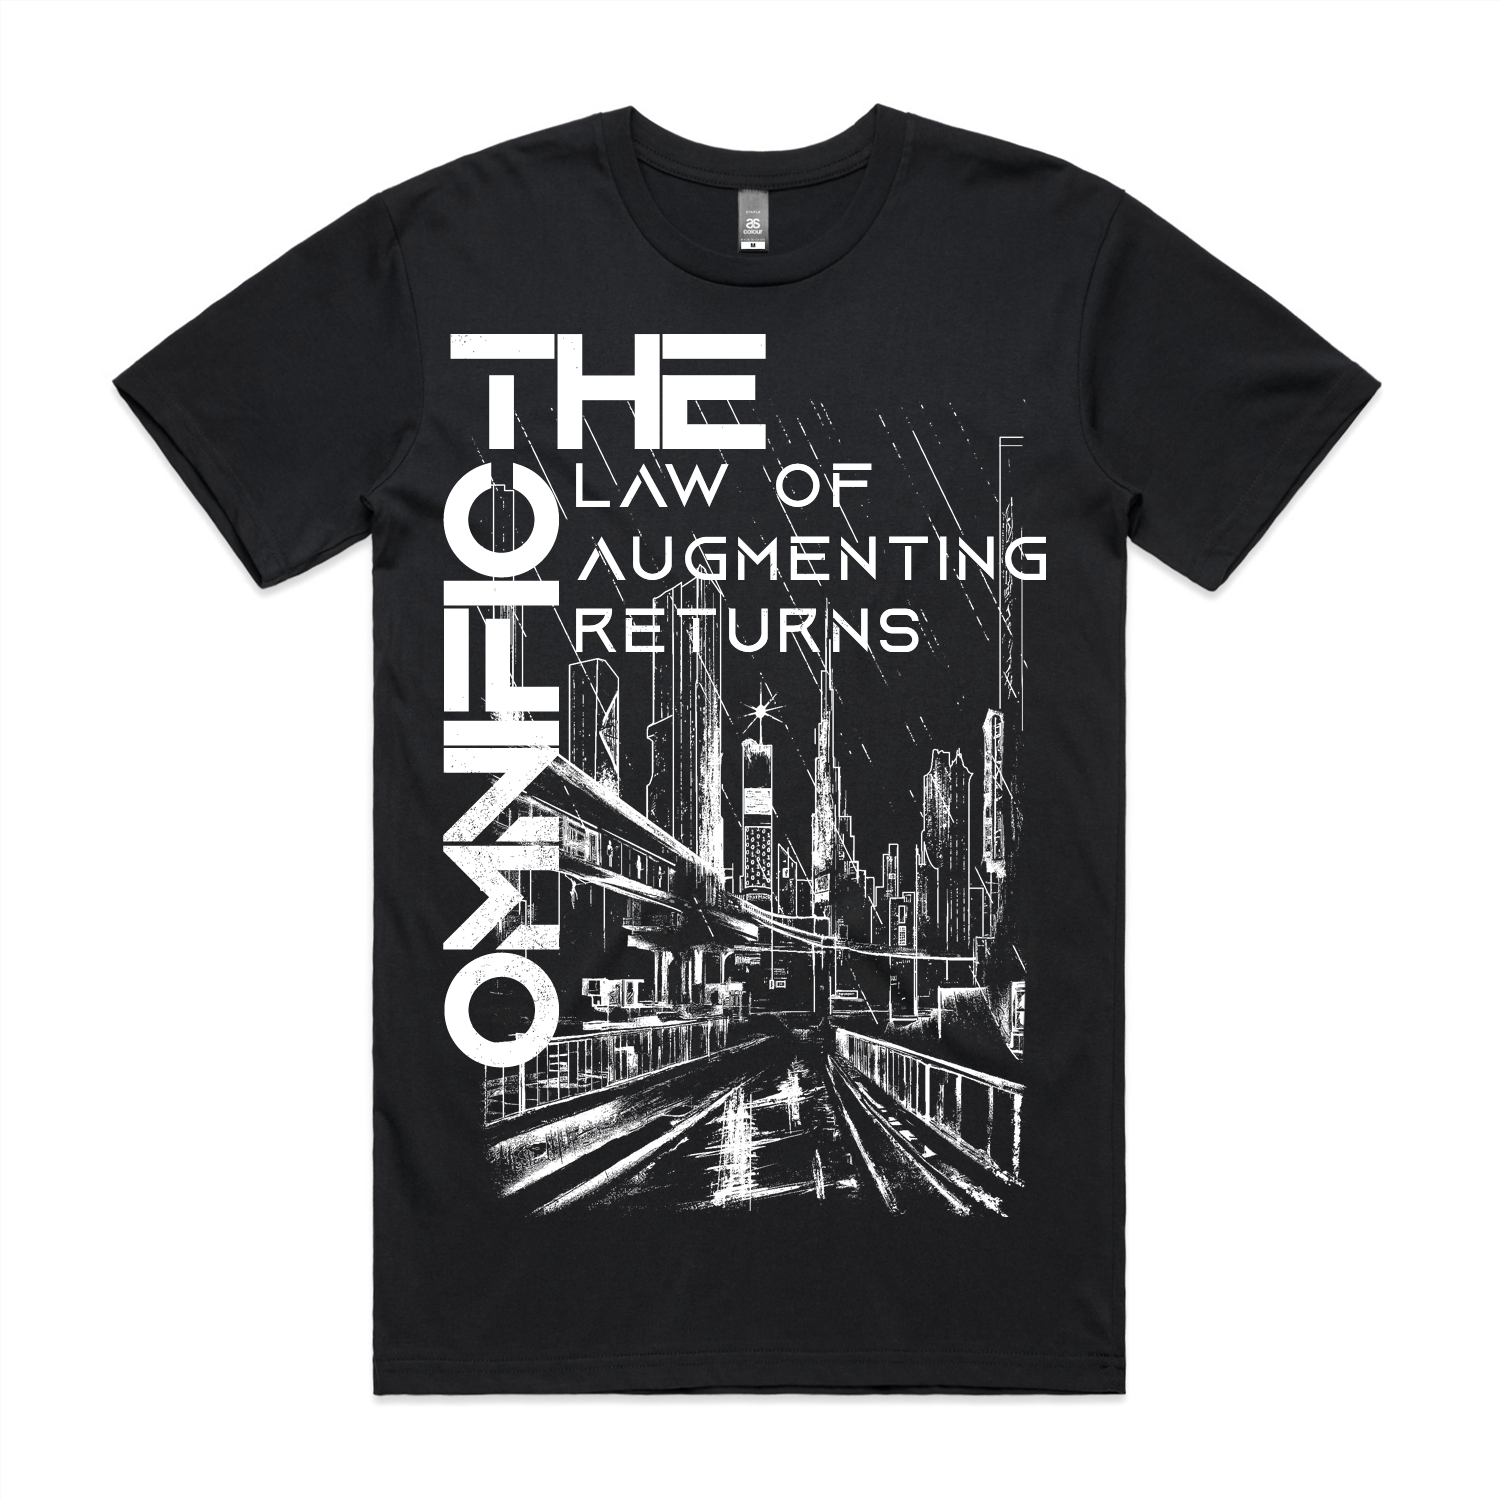 THE OMNIFIC // THE LAW OF AUGMENTING RETURNS - STENCIL T-SHIRT